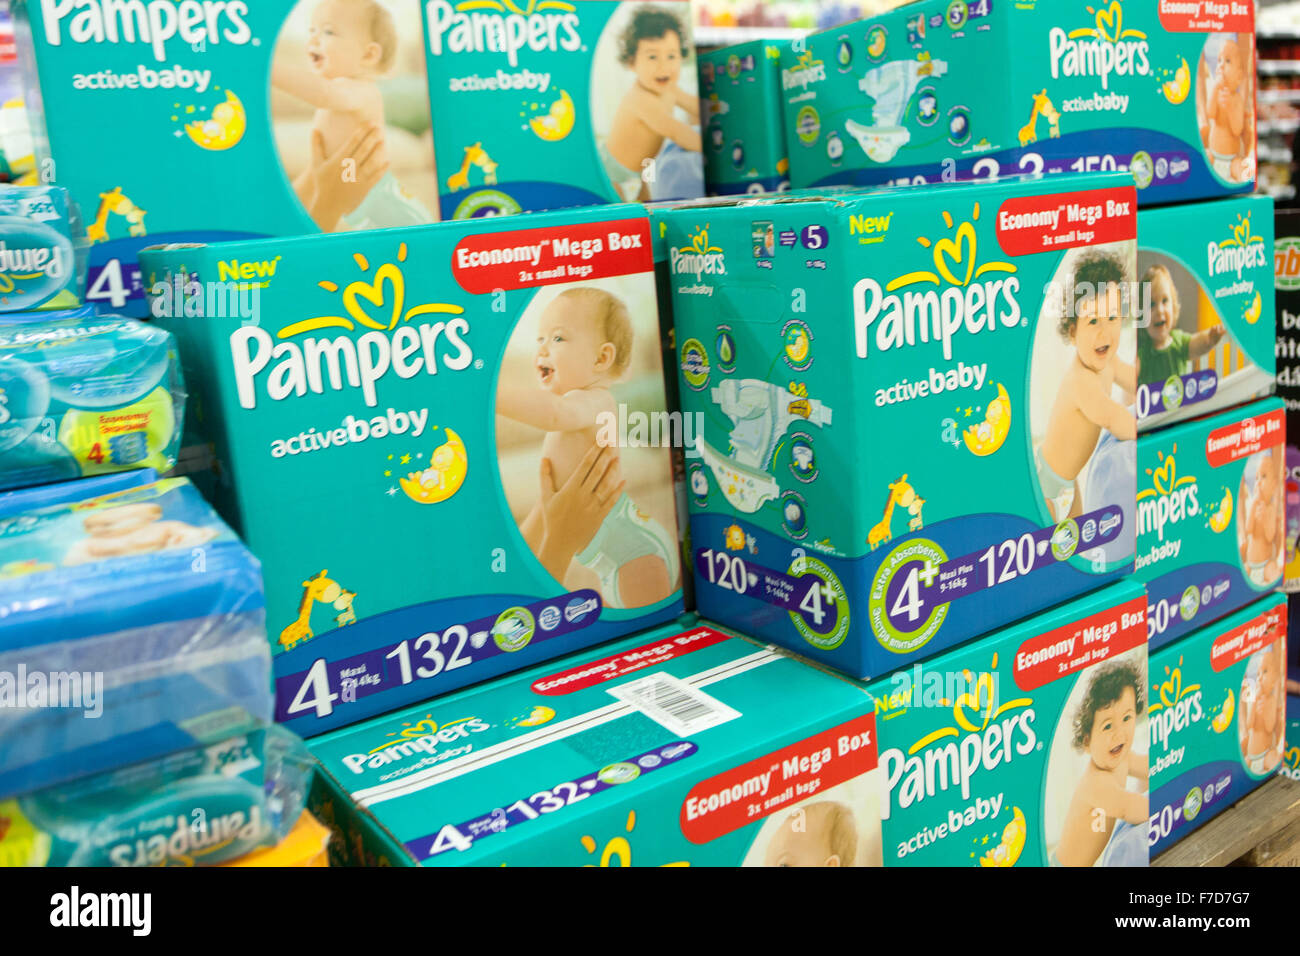 Baby diapers Pampers , Czech Republic supermarket sales Stock Photo - Alamy